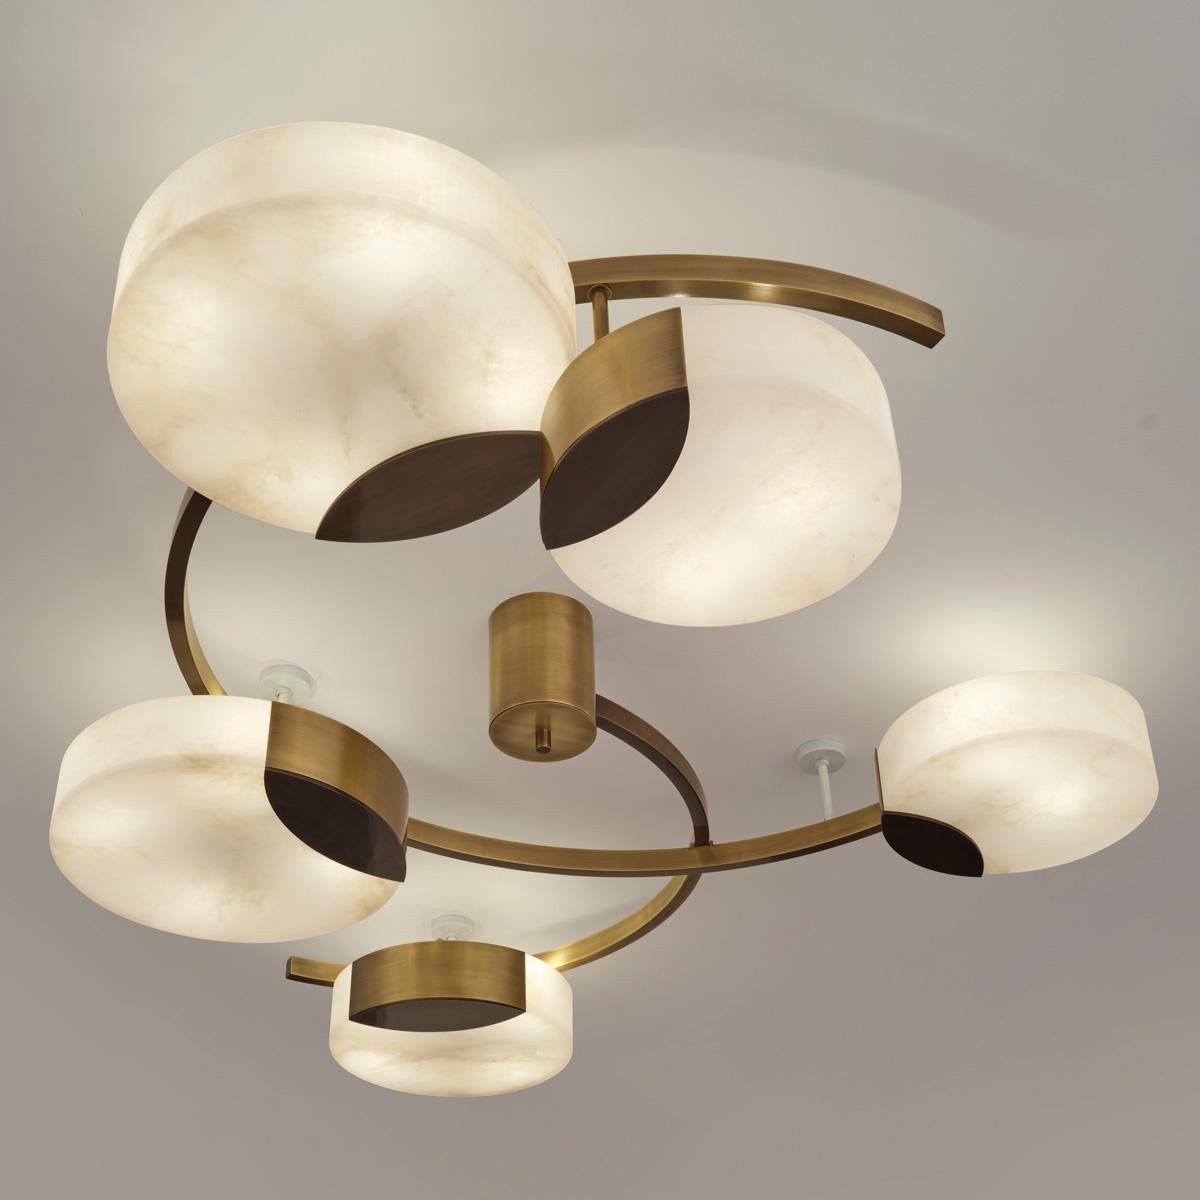 Contemporary Cloud N.5 Ceiling Light by Gaspare Asaro-Satin Brass Finish For Sale